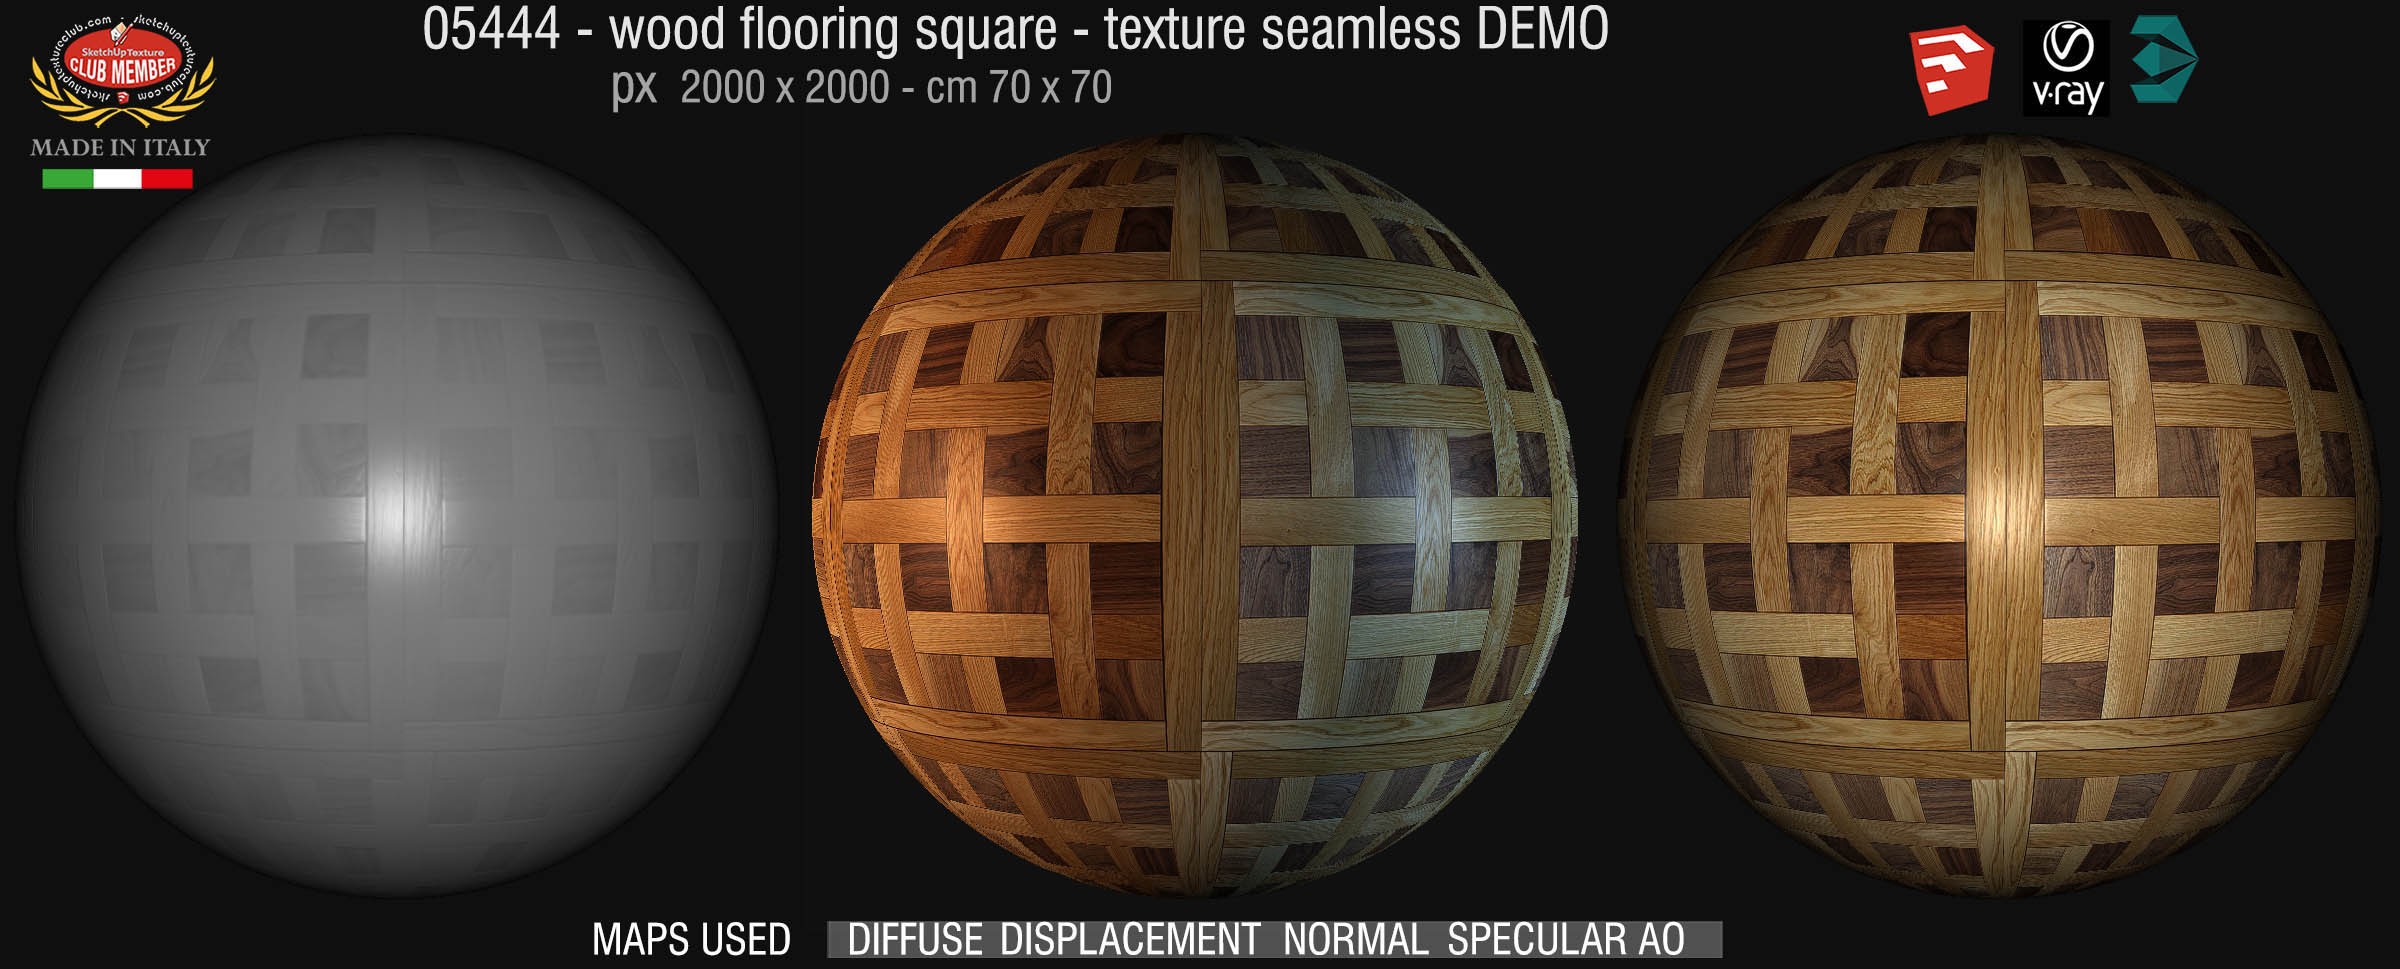 05444 Wood flooring square texture seamless + maps DEMO